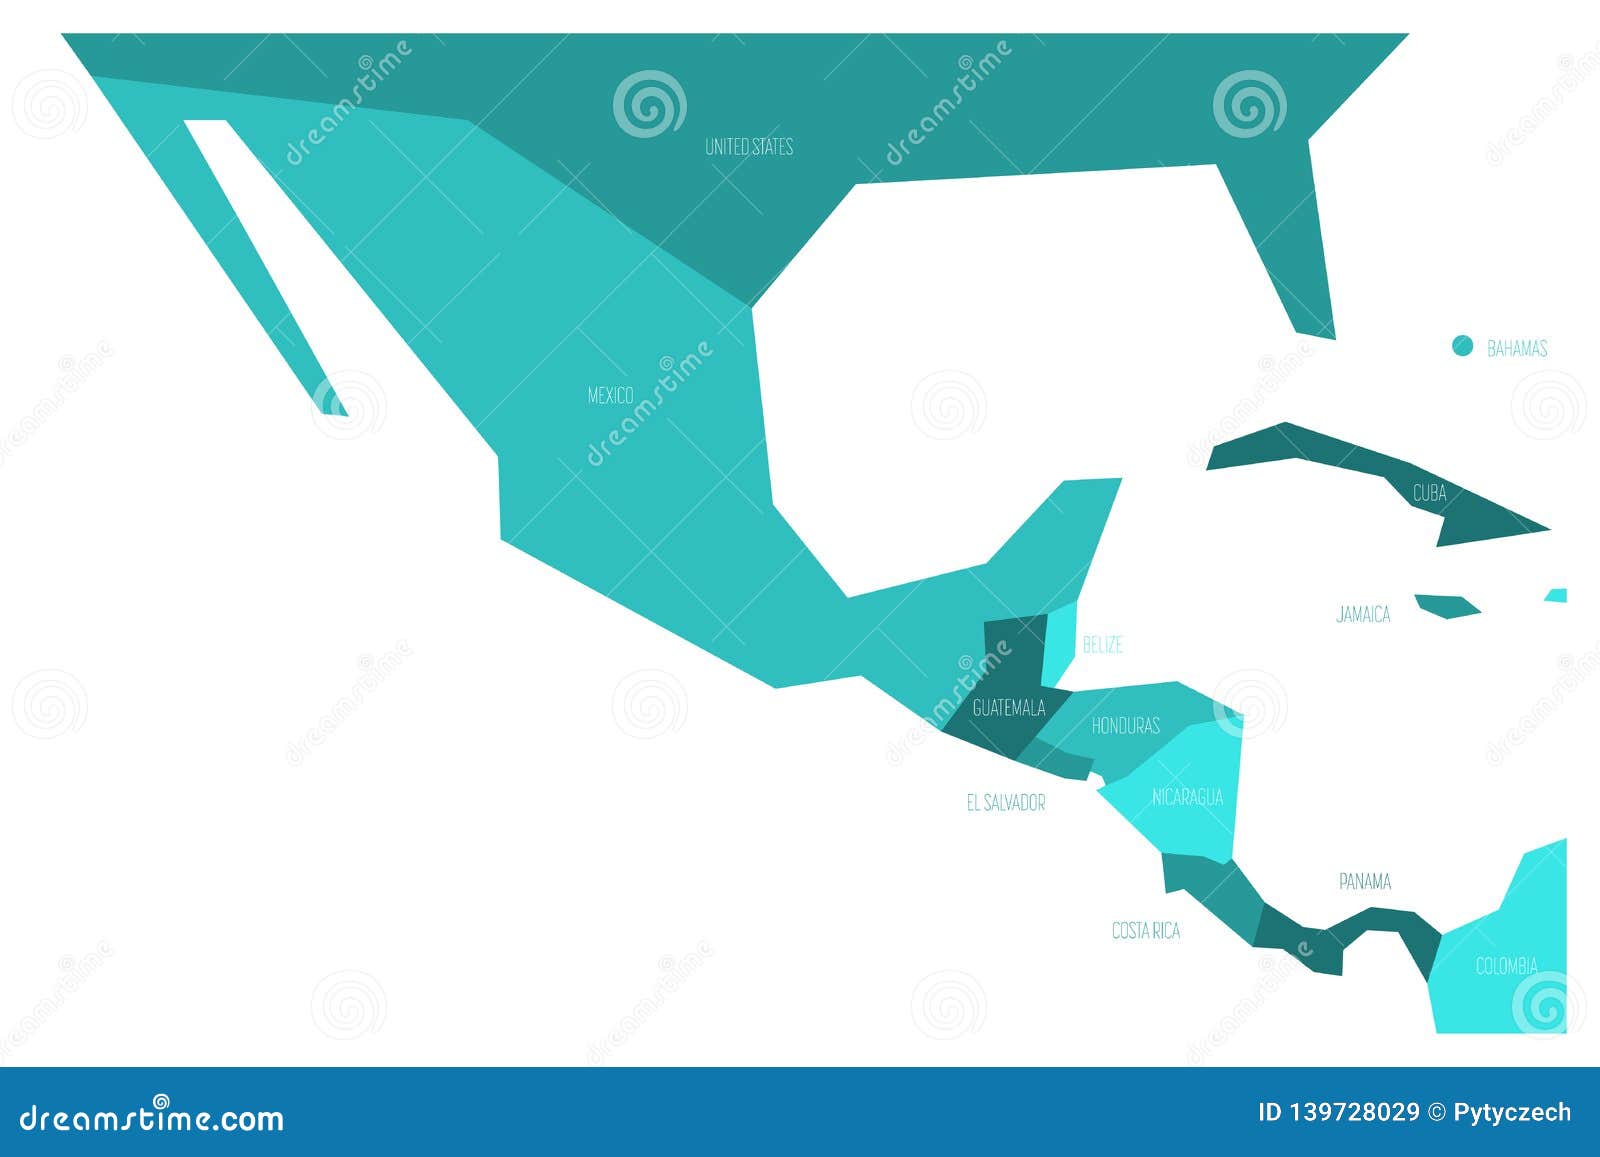 political map of mexico and central amercia. simlified schematic flat  map in four shades of turquoise blue